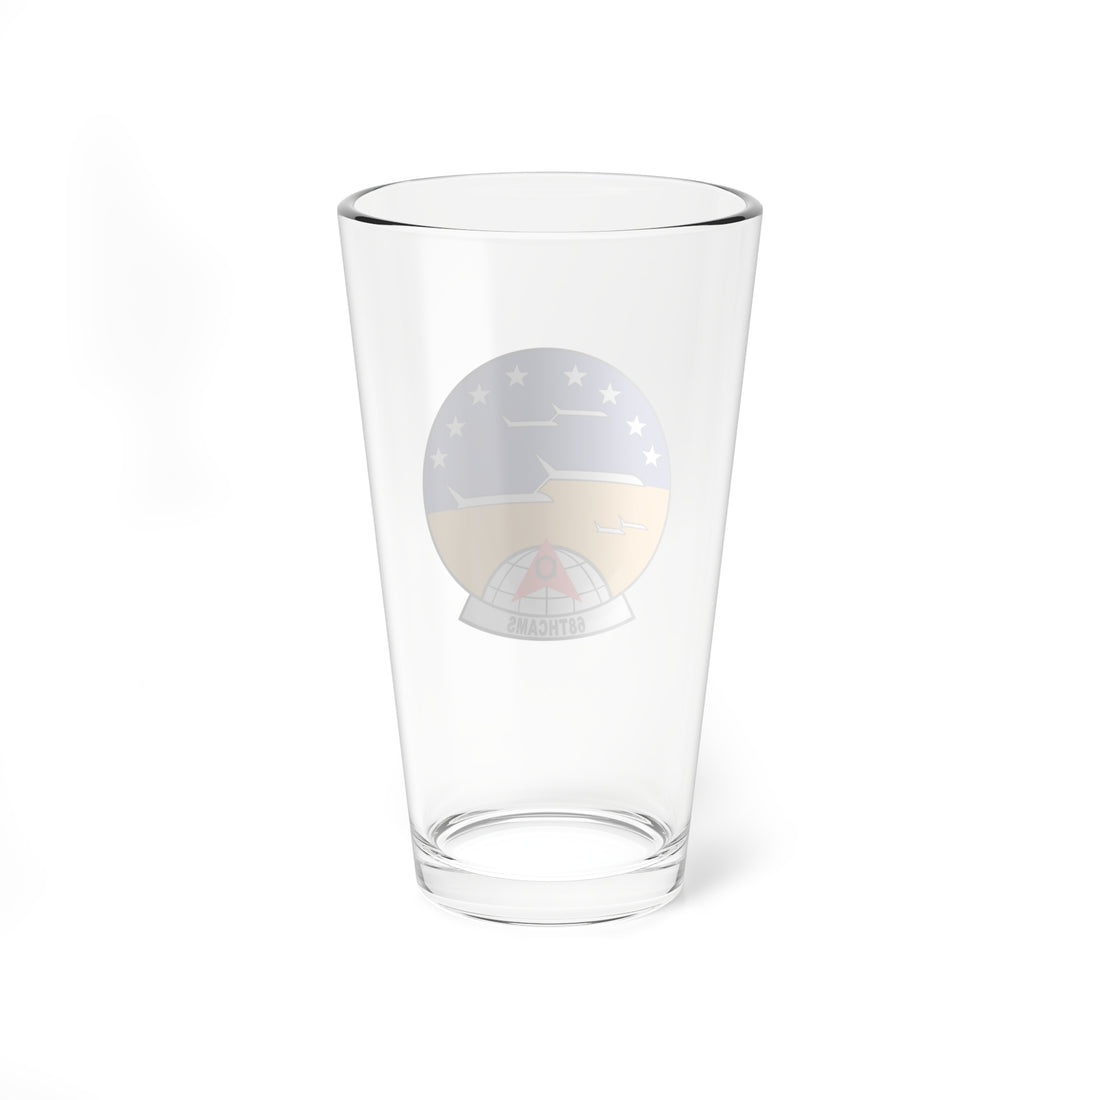 68th Consolidated Aircraft Maintenance Squadron -no wings- Pint Glass, USAF Consolidated Aircraft Squadron concept from the SAC days